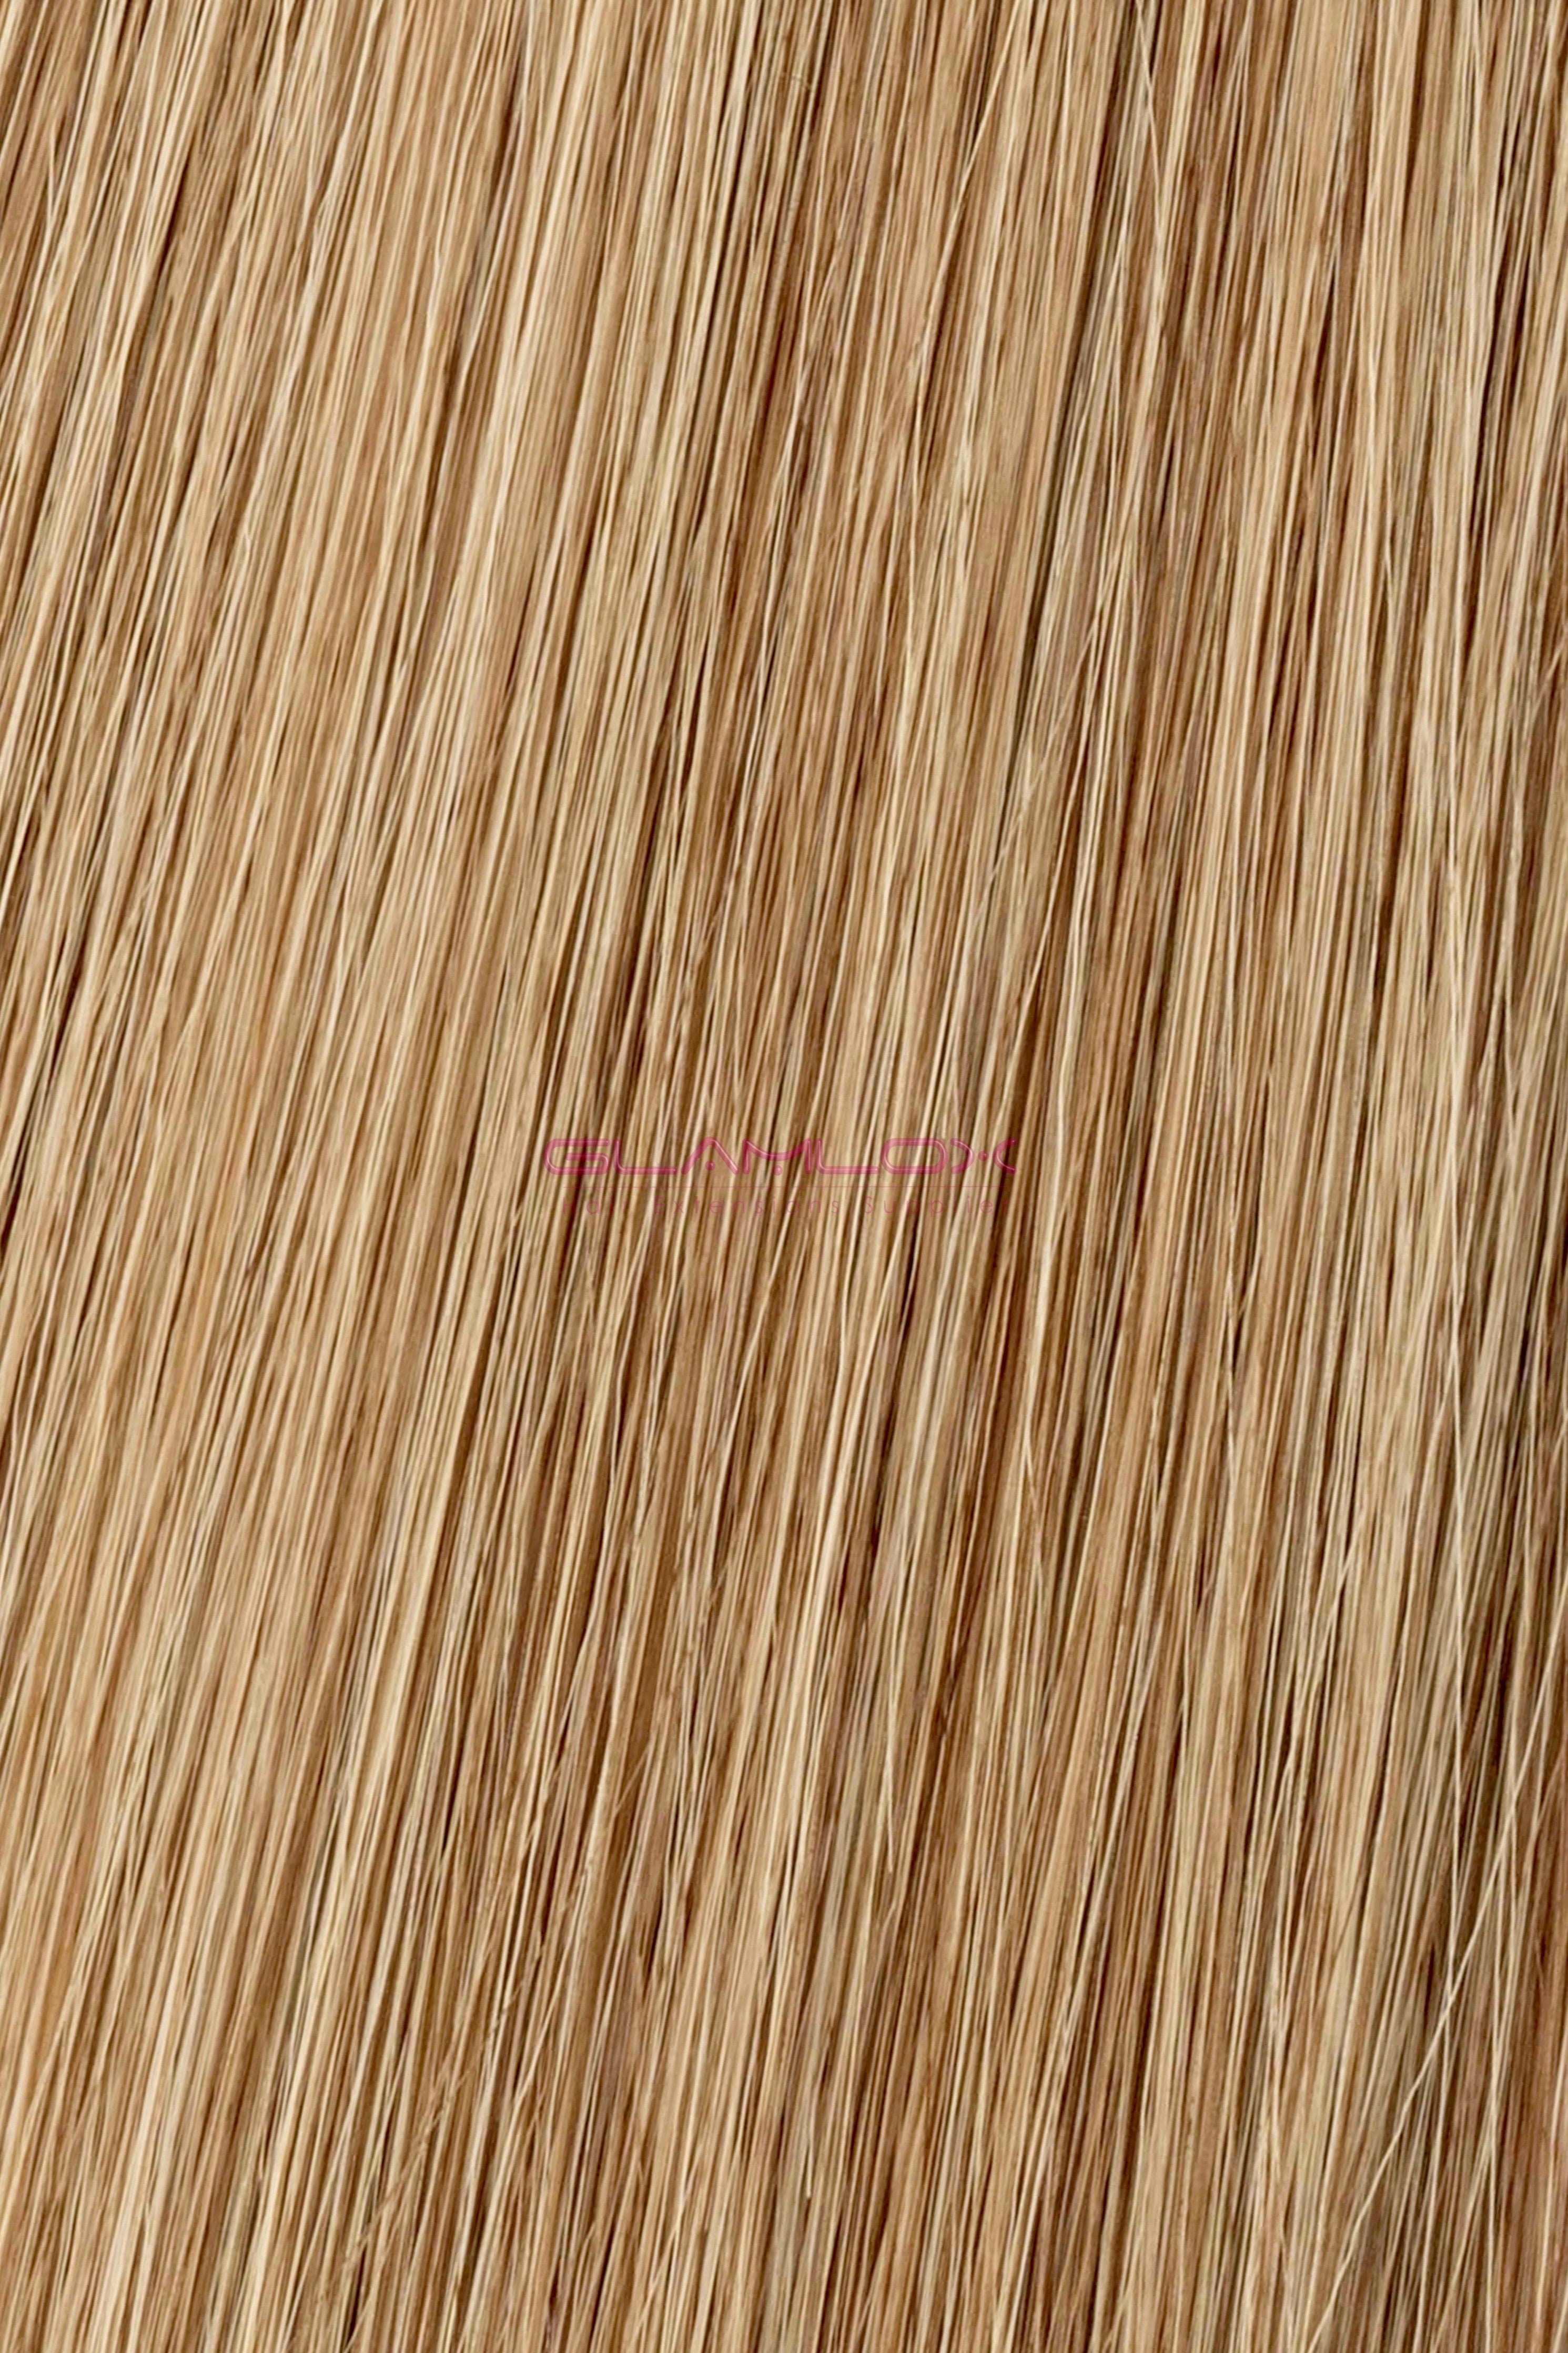 16" Full Weft Hair Extensions - Russian Mongolian Double Drawn Remy Human Hair